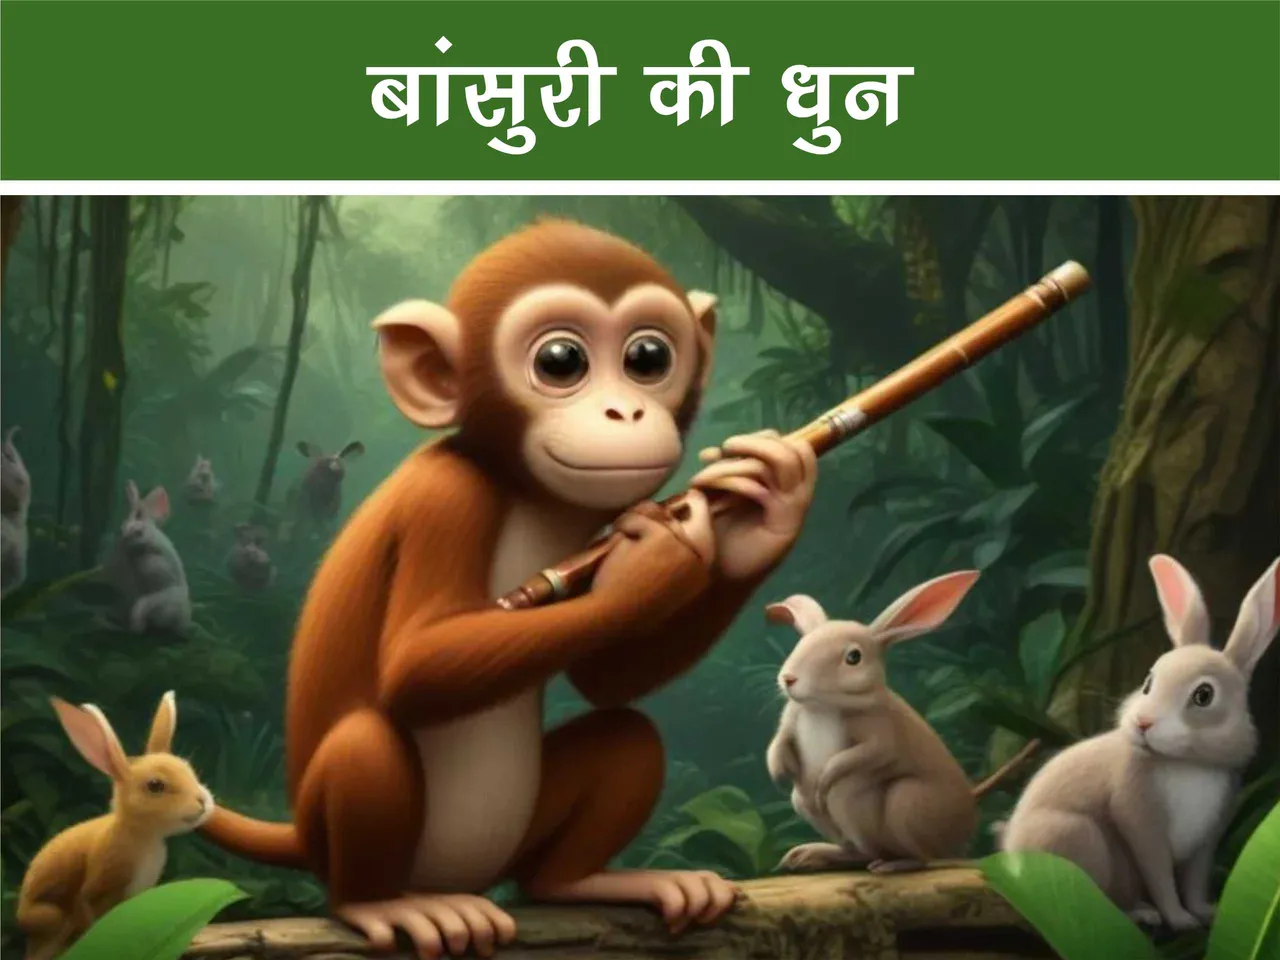 Monkey with a flute in hand cartoon image